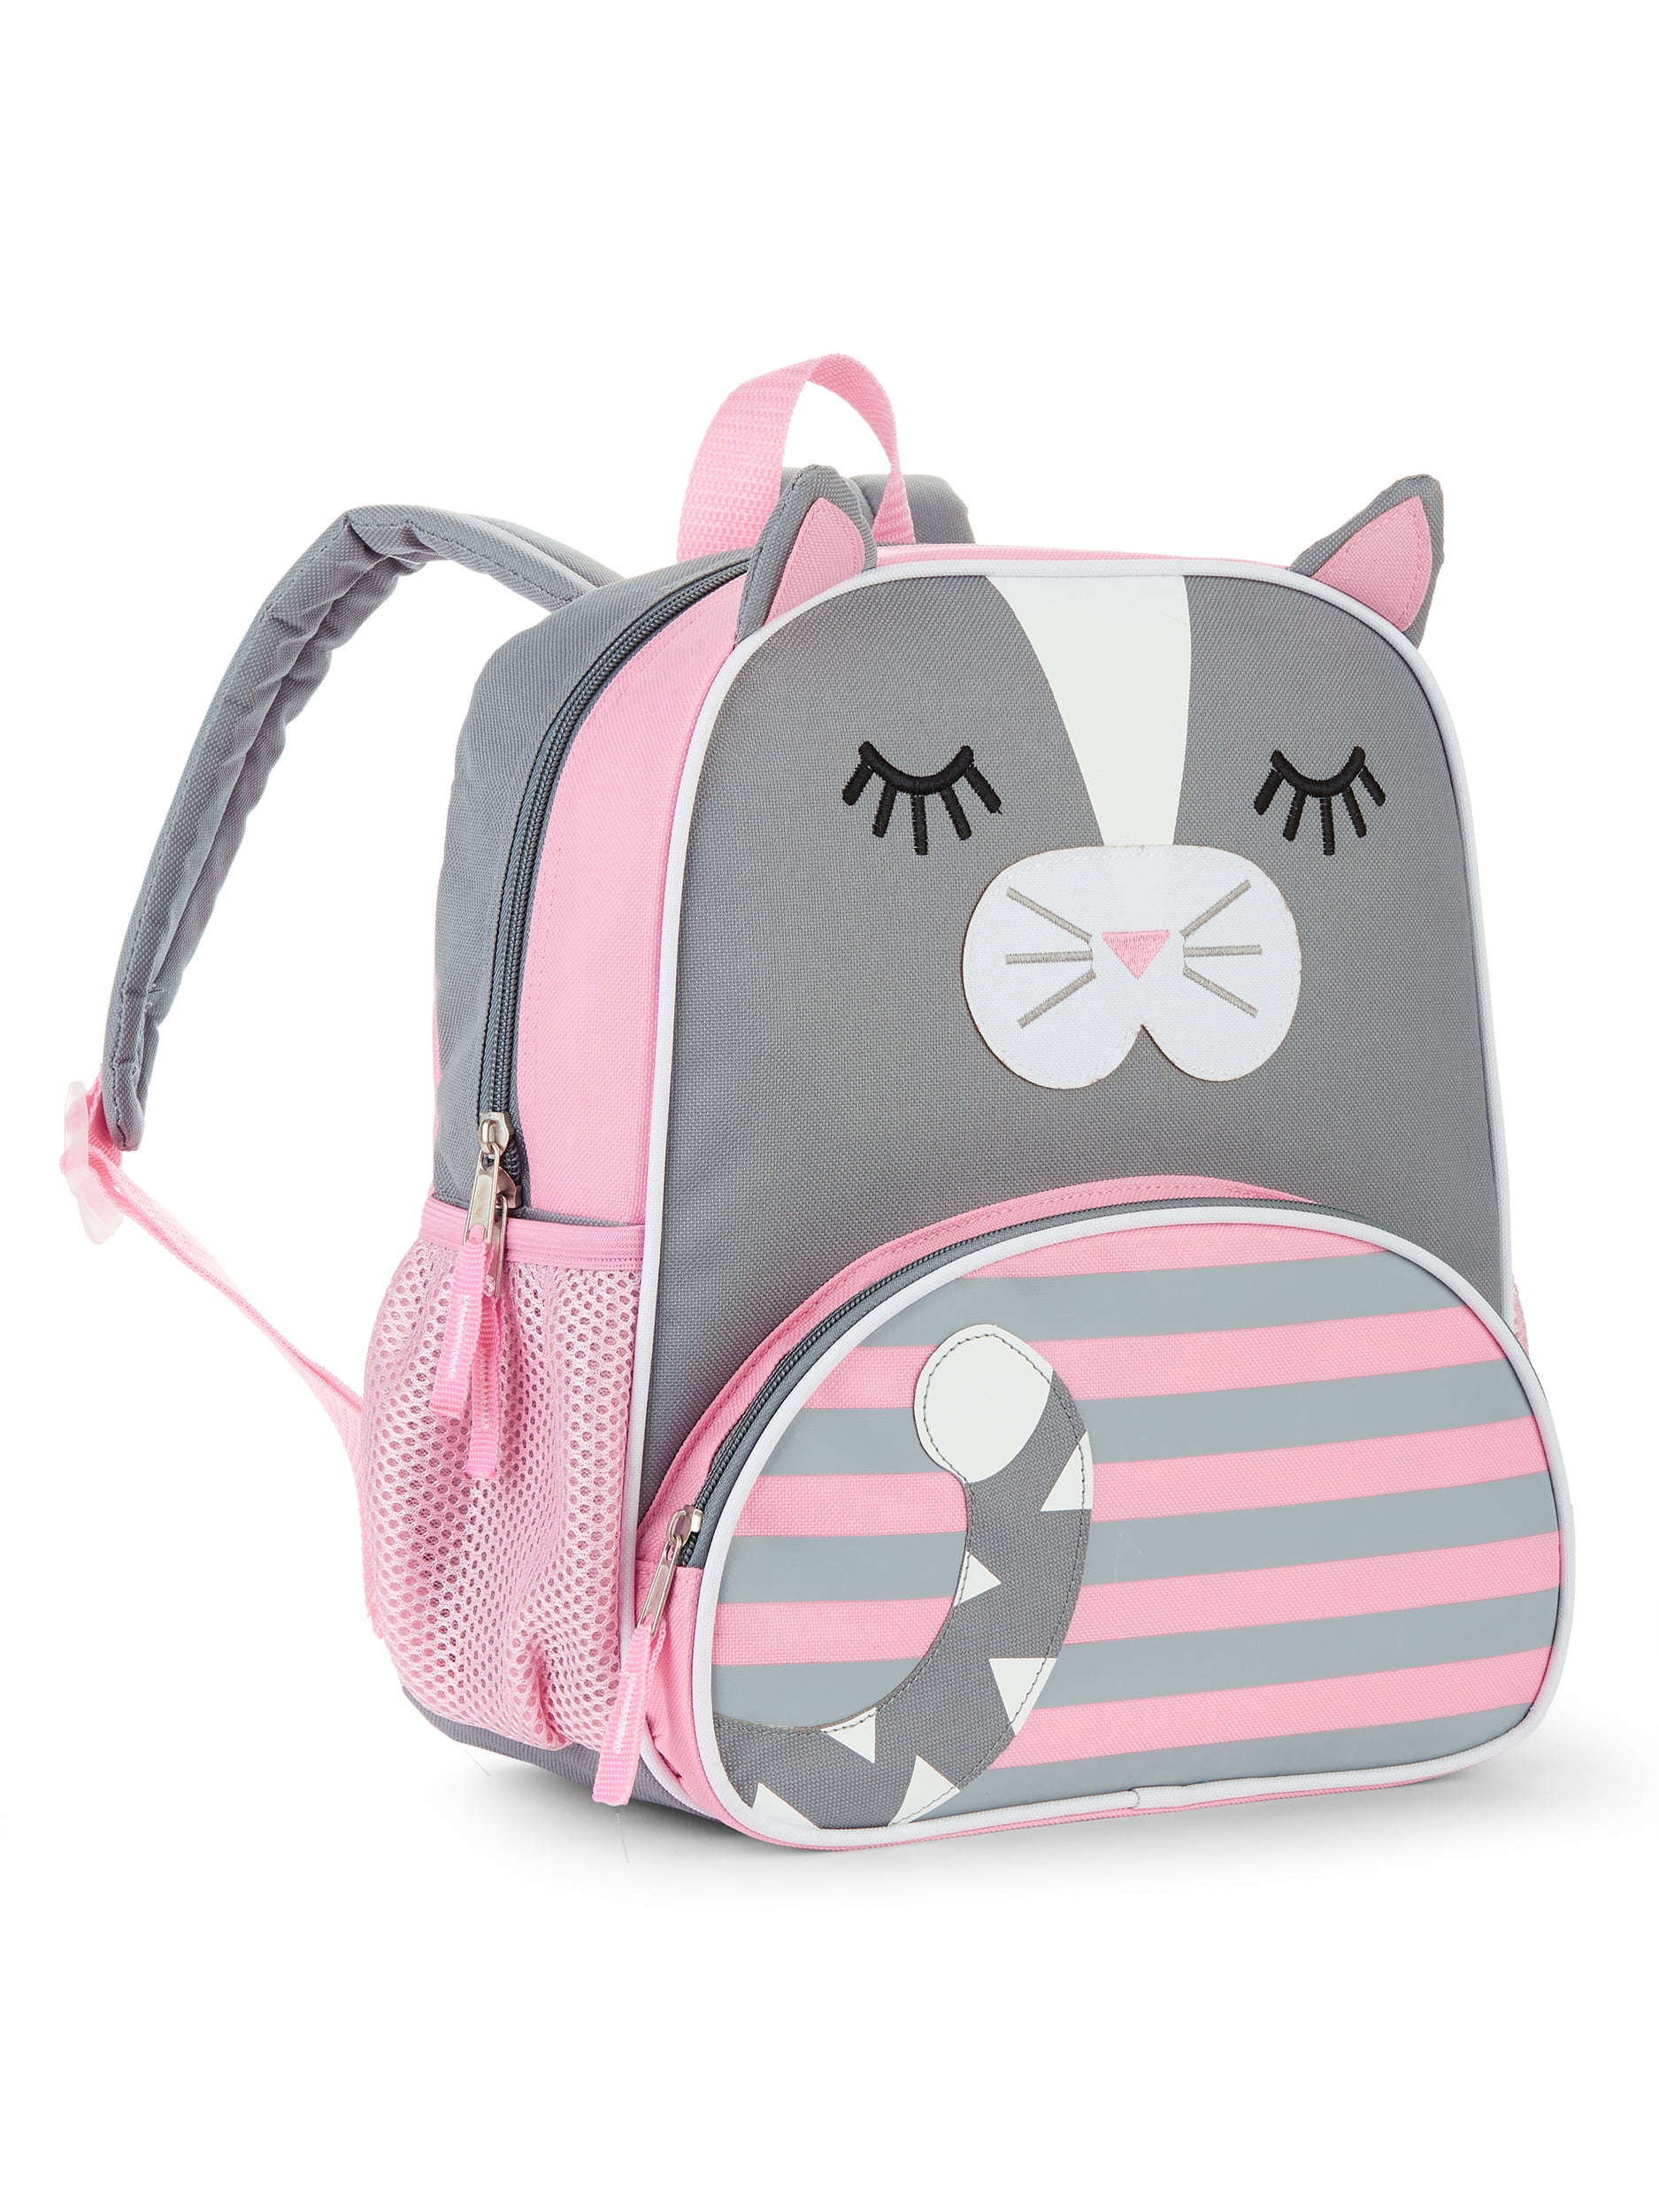 NEW Wonder Nation 12" Kids Kitty Cat Critter Backpack with Mesh Pockets 